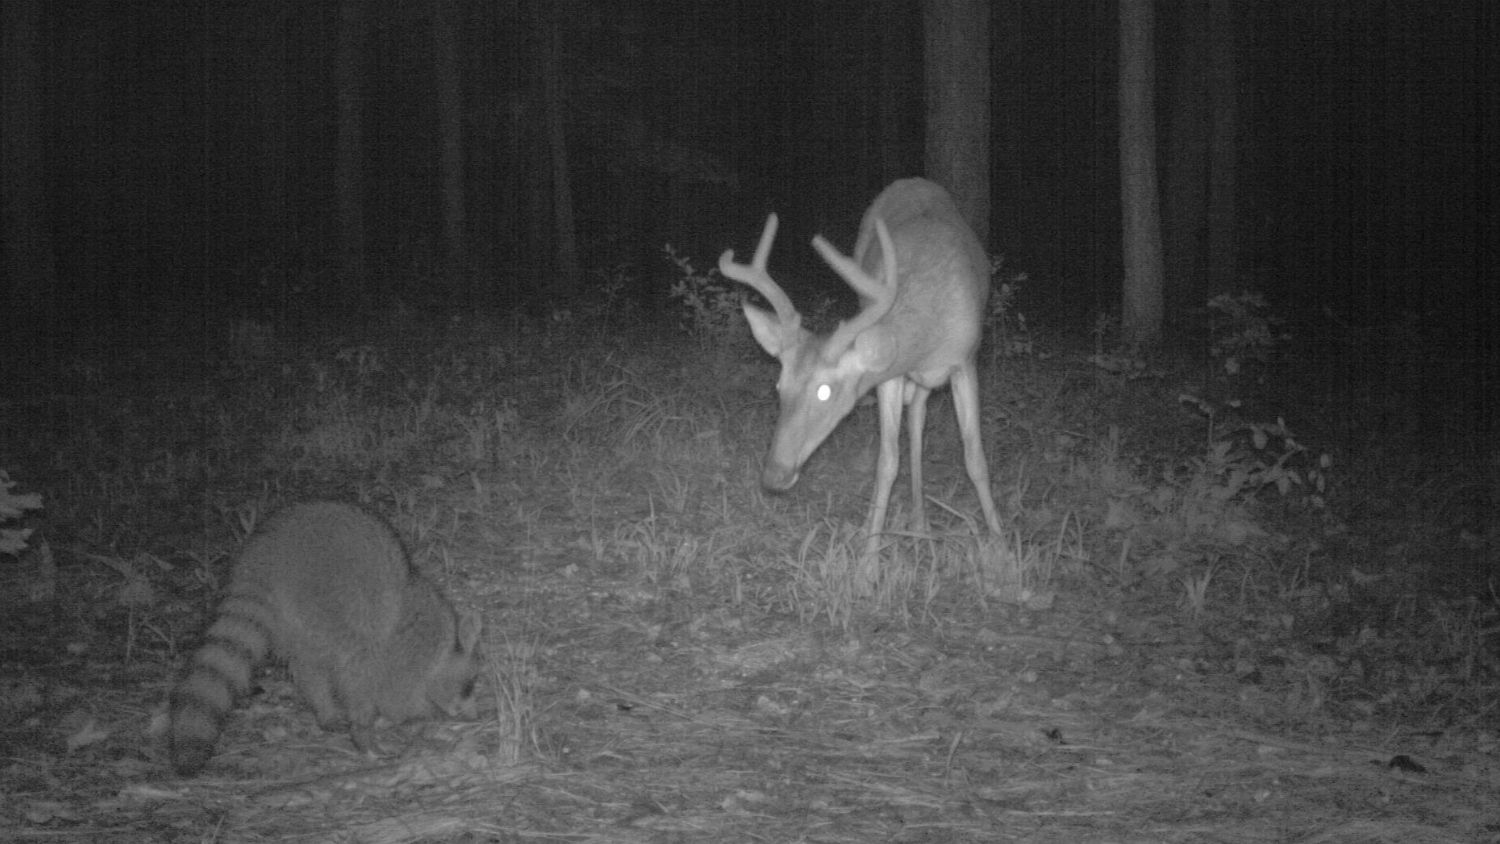 Raccoon and deer foraging together - Do Racoons Fear Coyotes? A Research Team Used Cameras to Find Out - Forestry and Environmental Resources NC State University